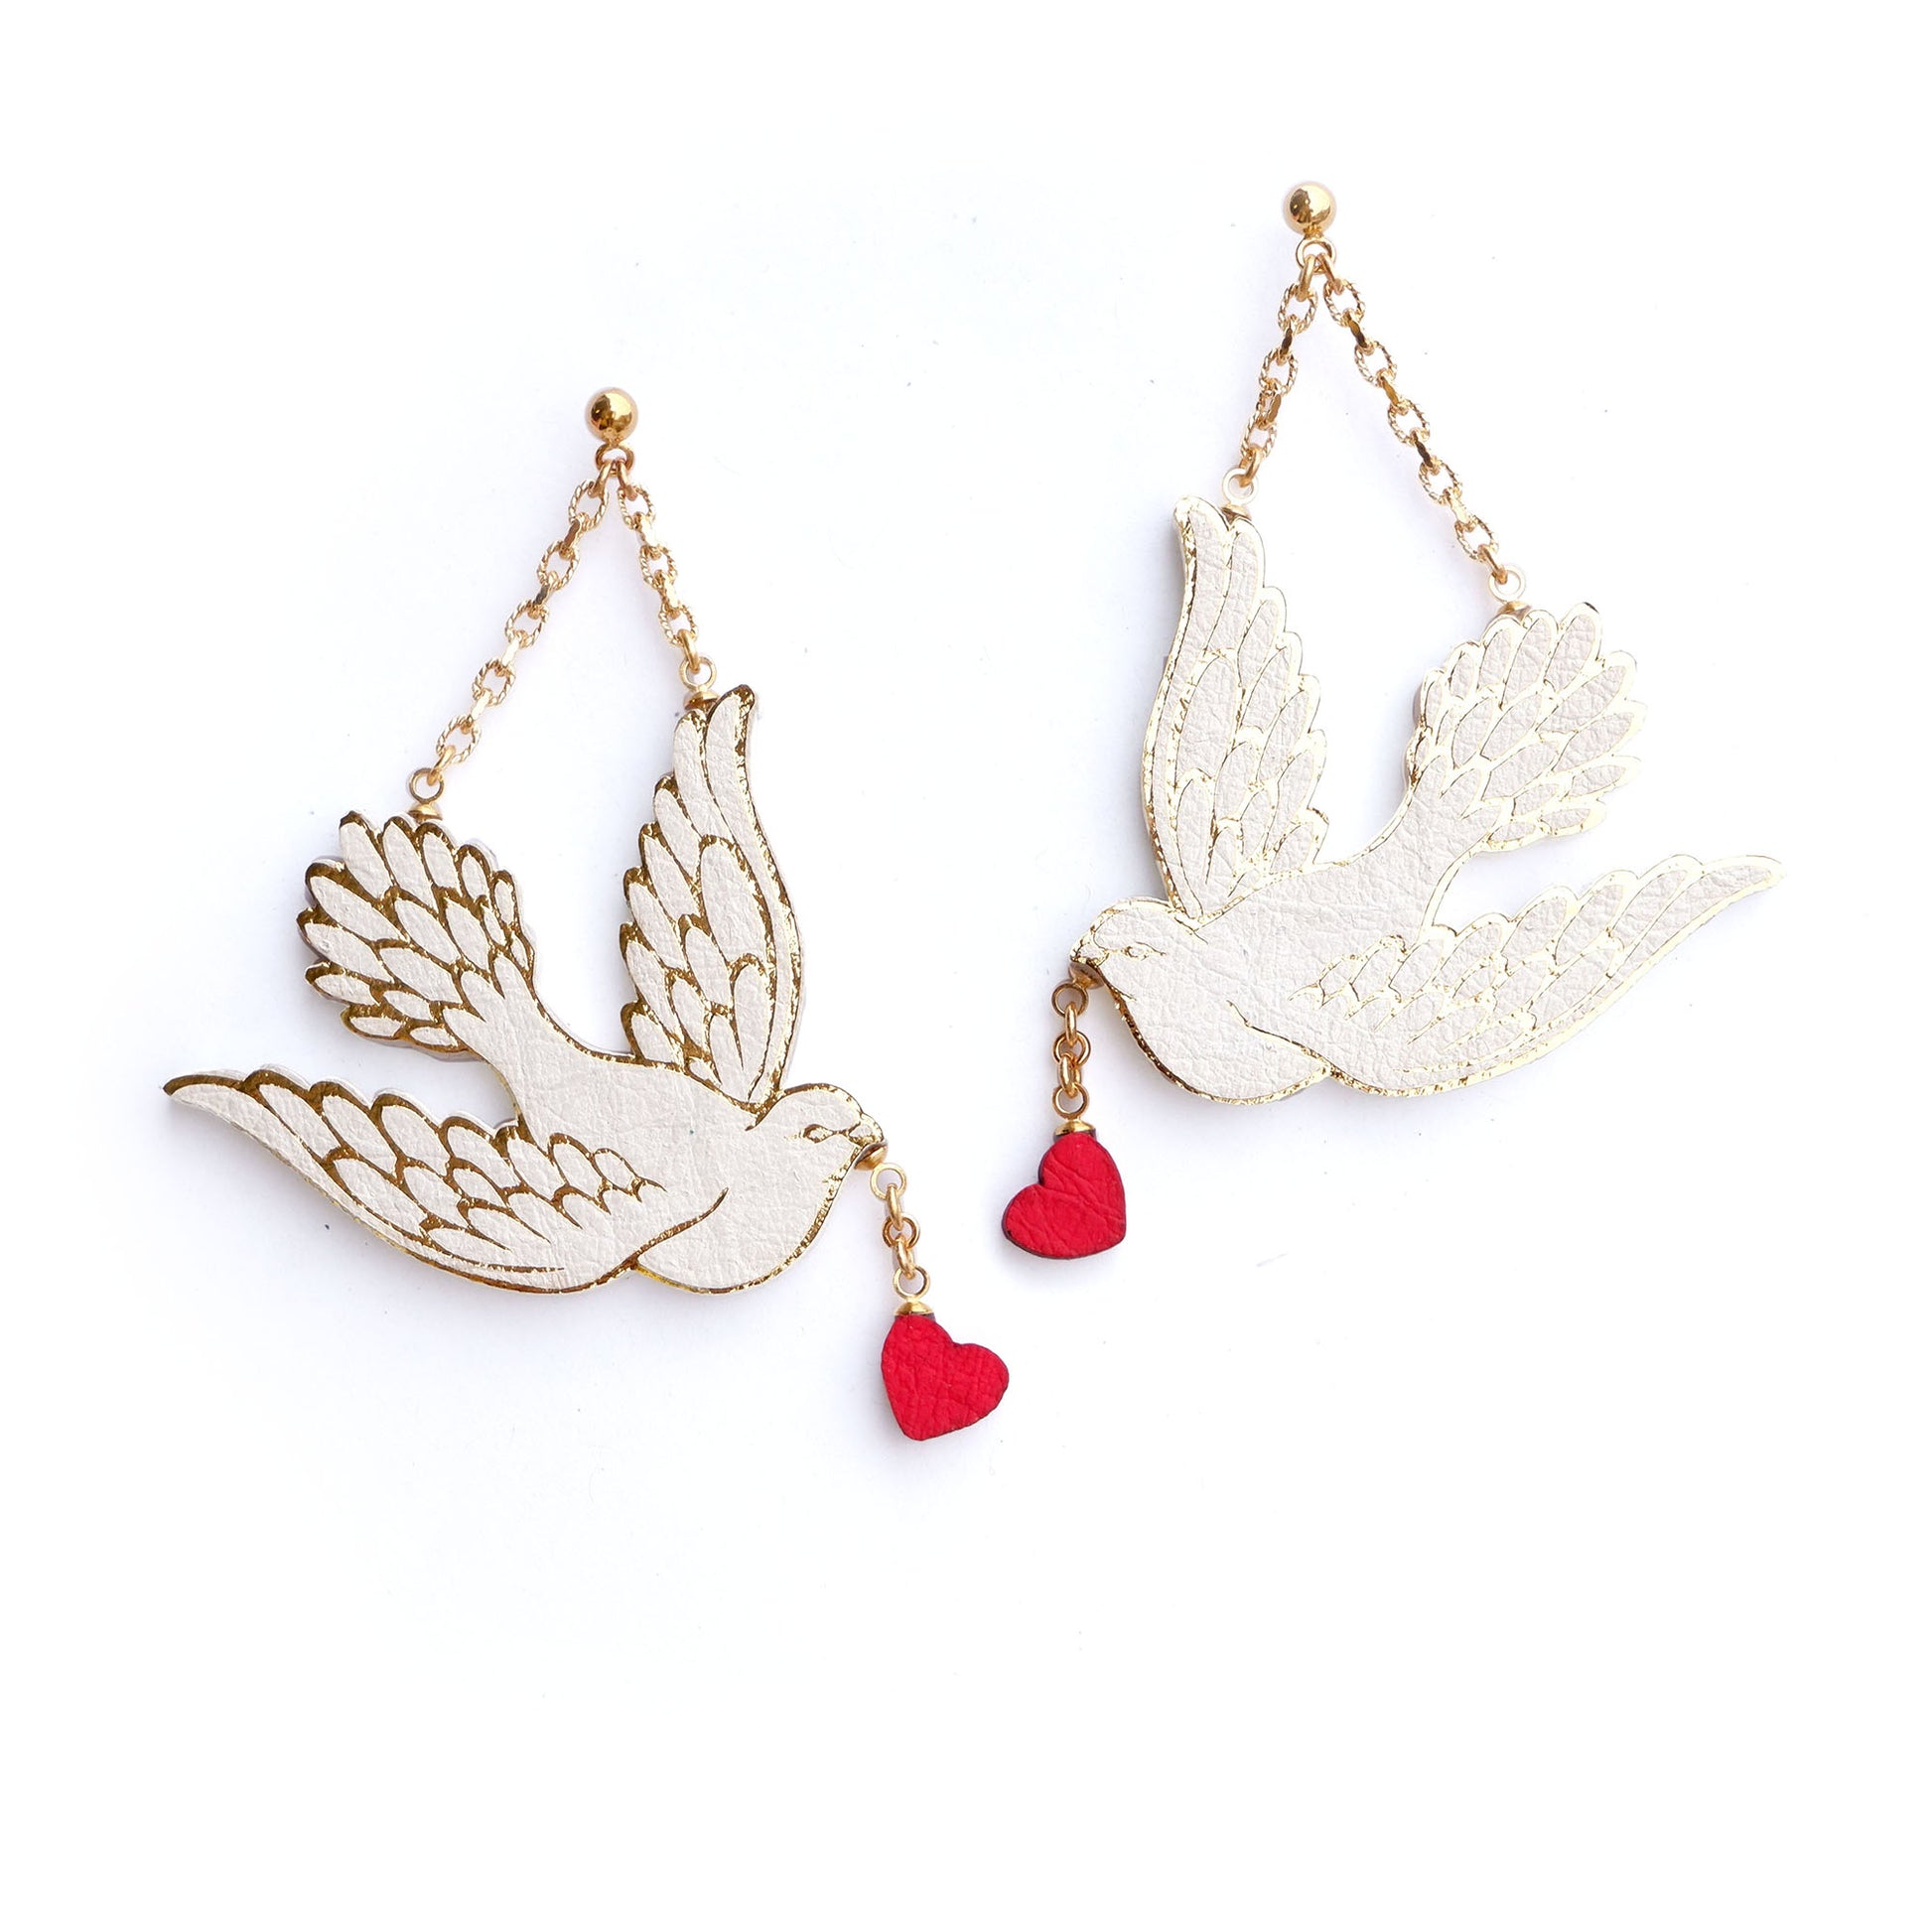 white & gold dove earrings, in a vegan plant based wood pulp & bamboo construction. The doves carry little red hearts in their beaks.